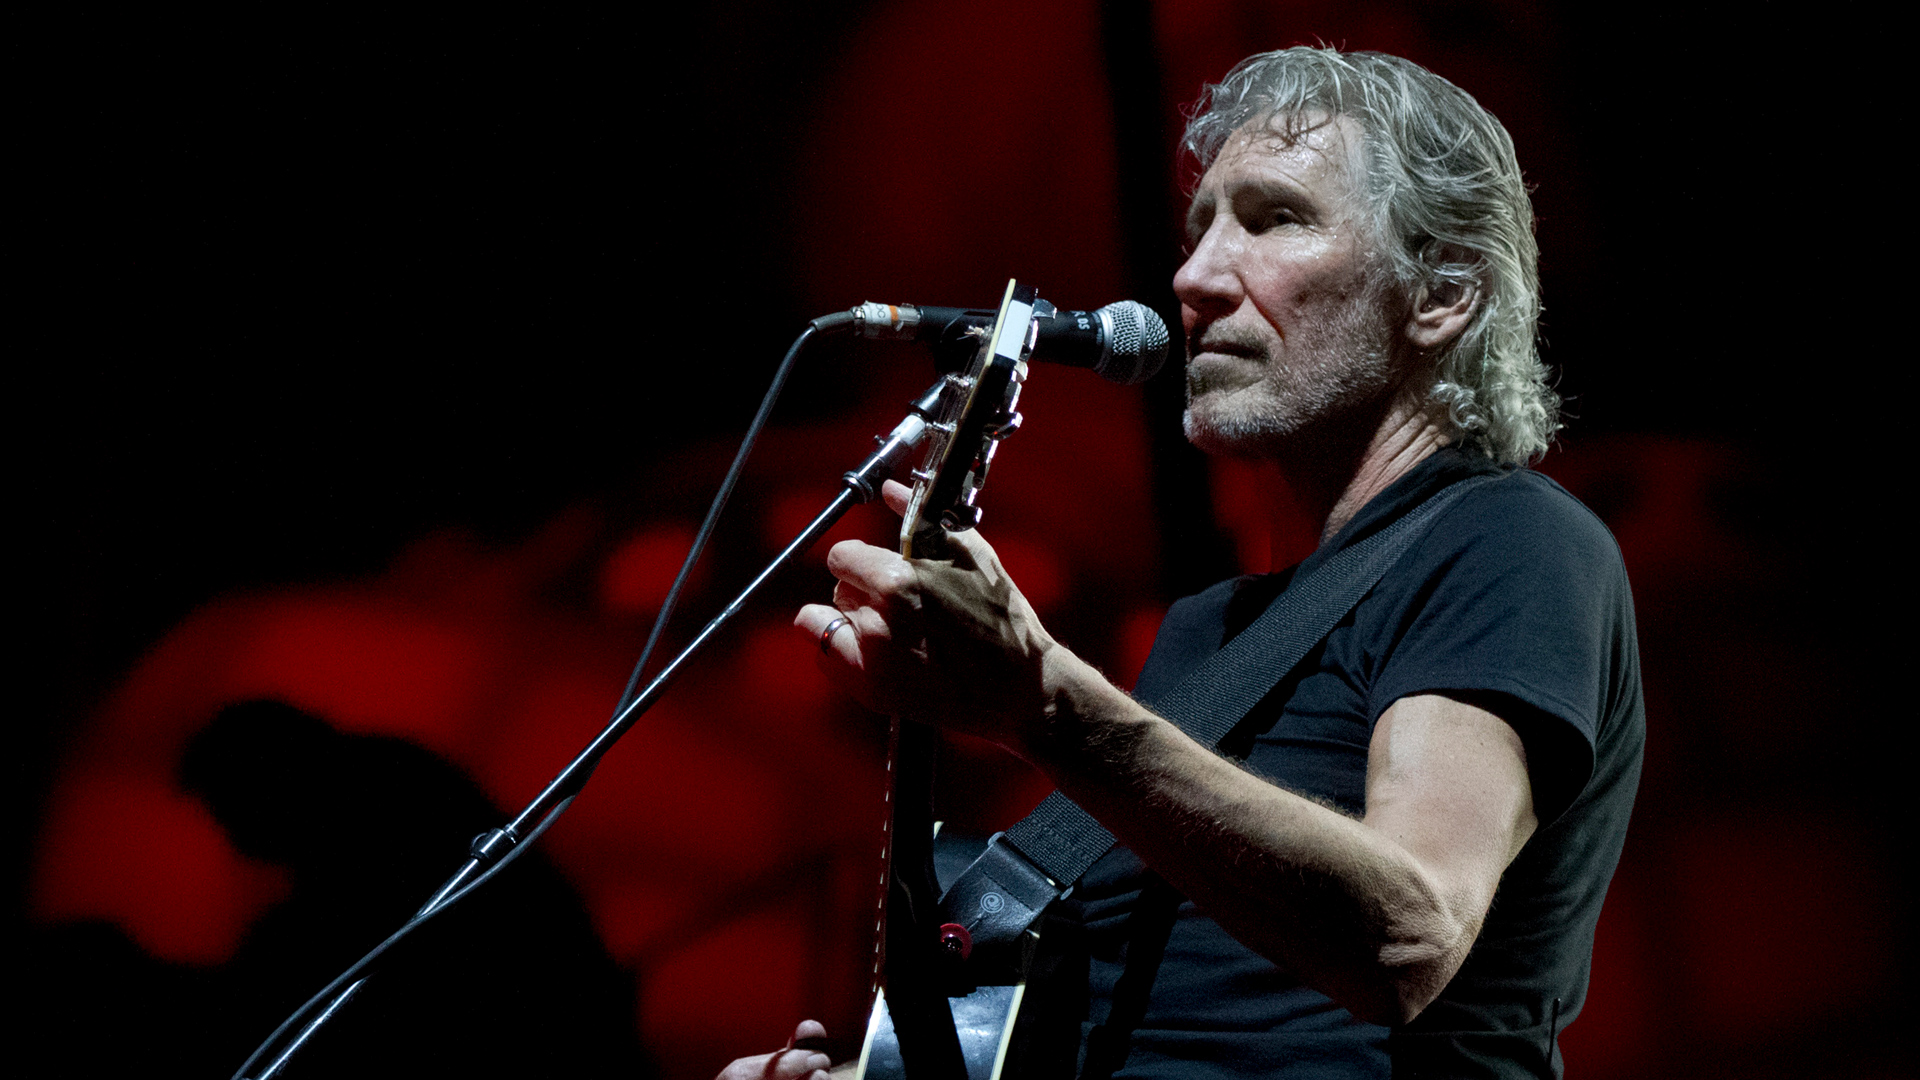 Roger Waters Birth Chart